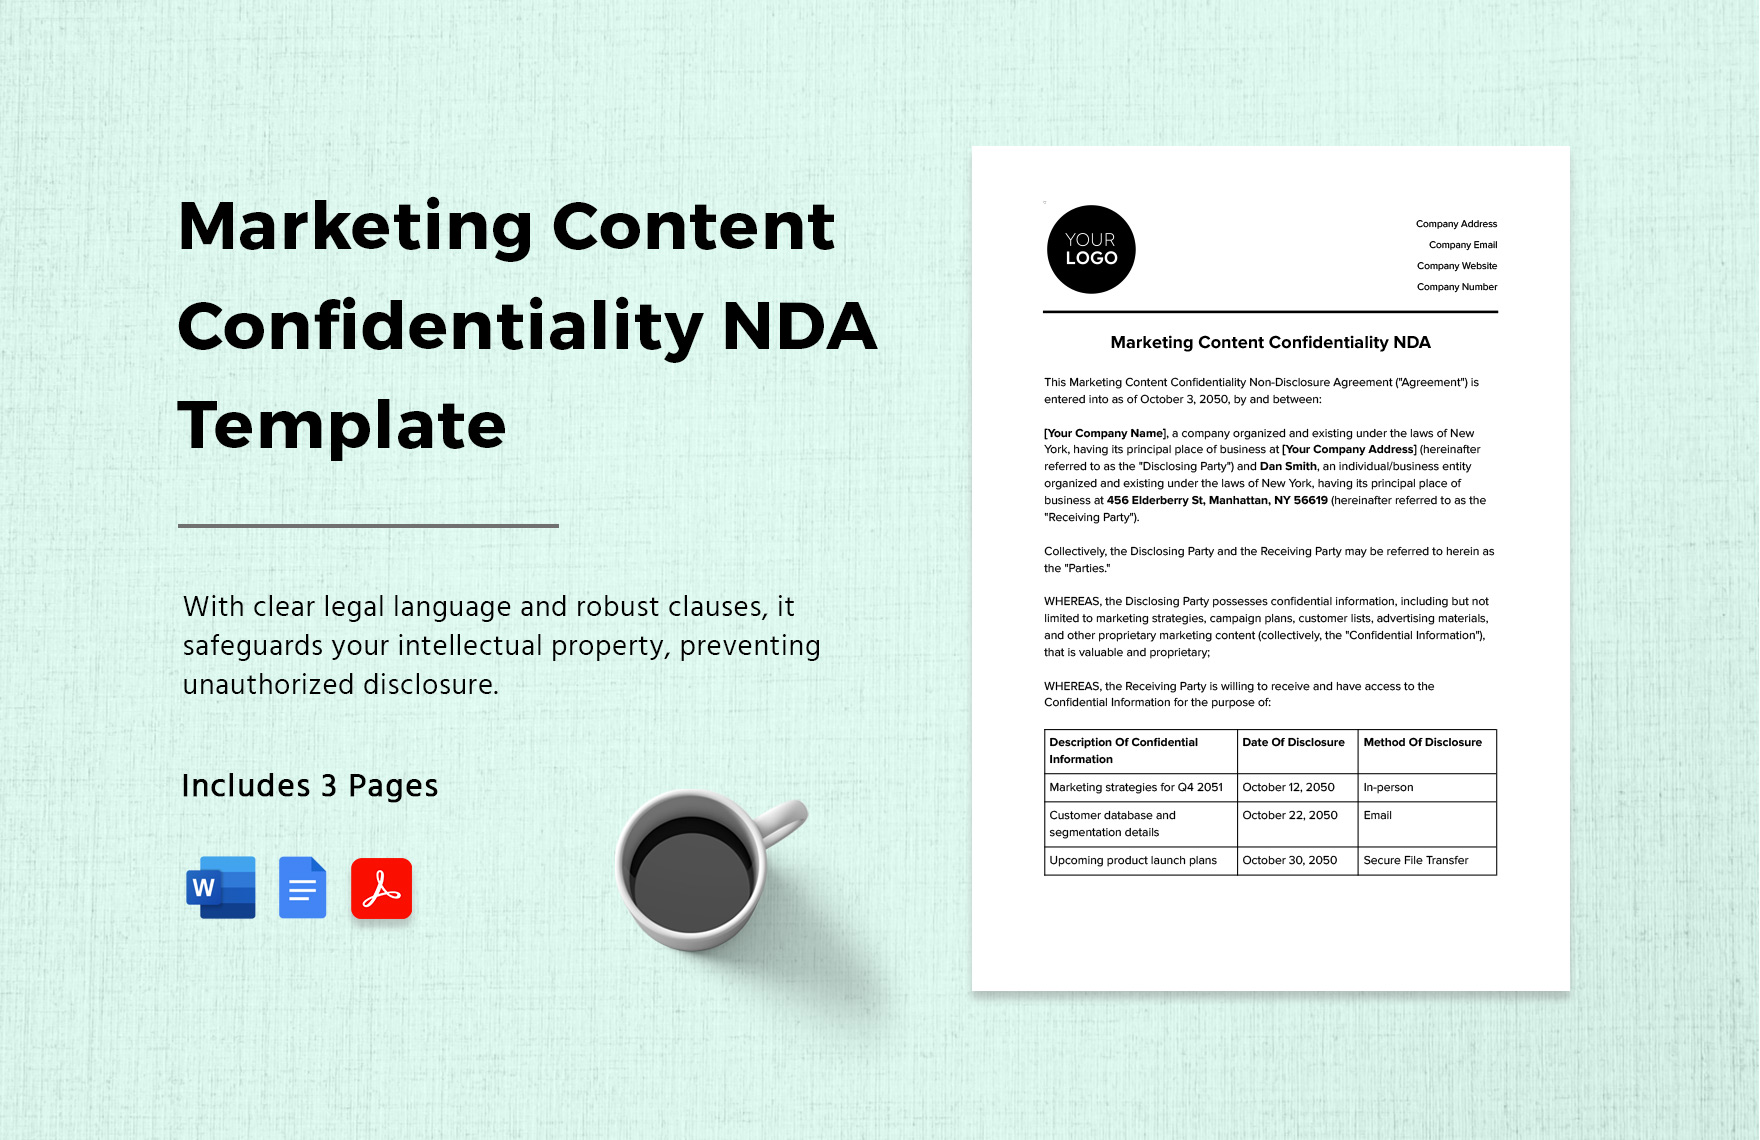 Marketing Content Confidentiality NDA Template